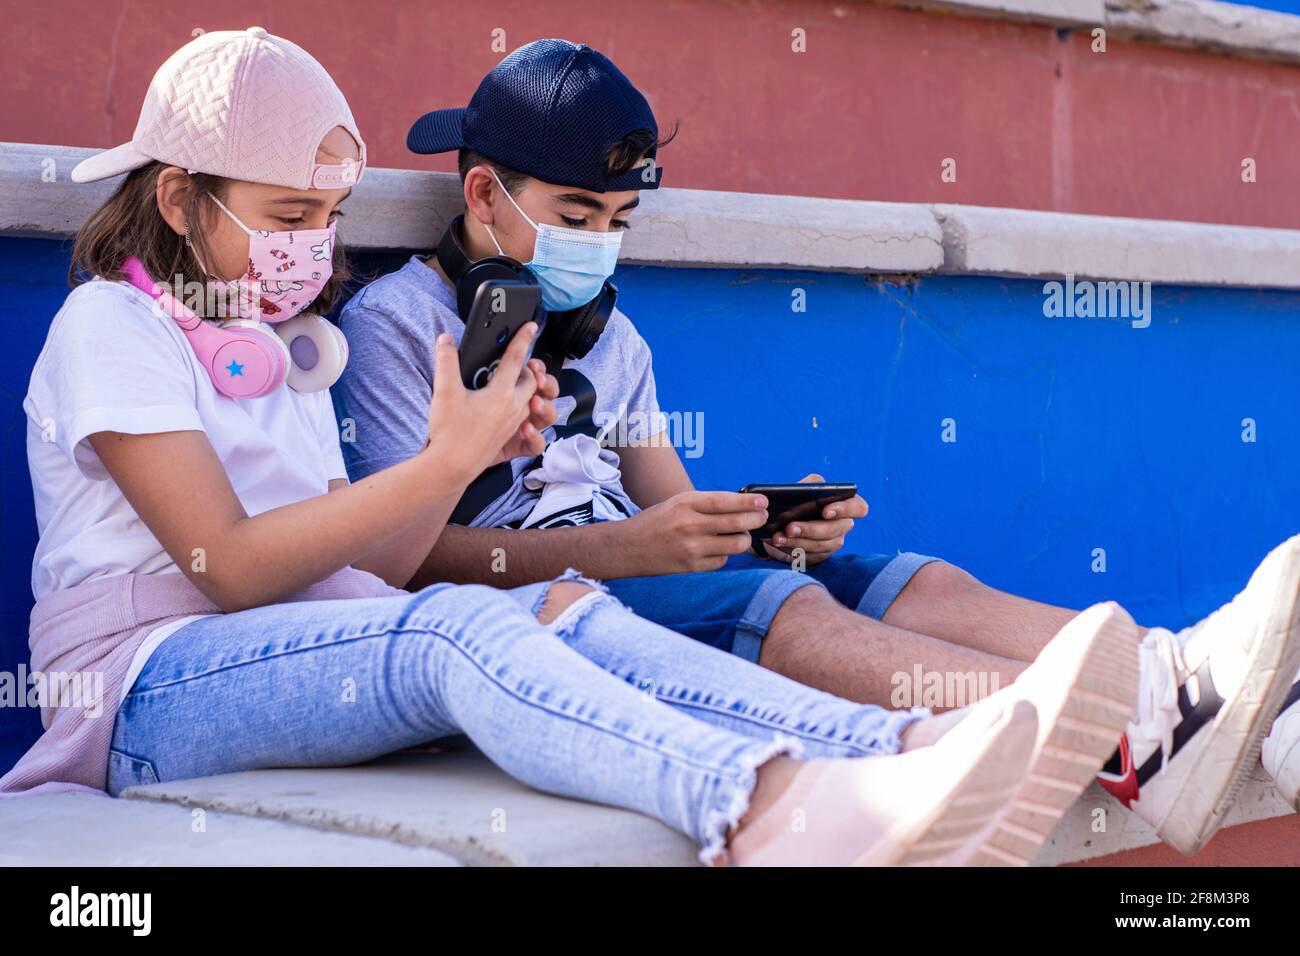 Two preteens, a boy and a girl, sitting on the bleachers with their masks on, use their mobile devices side by side. Stock Photo